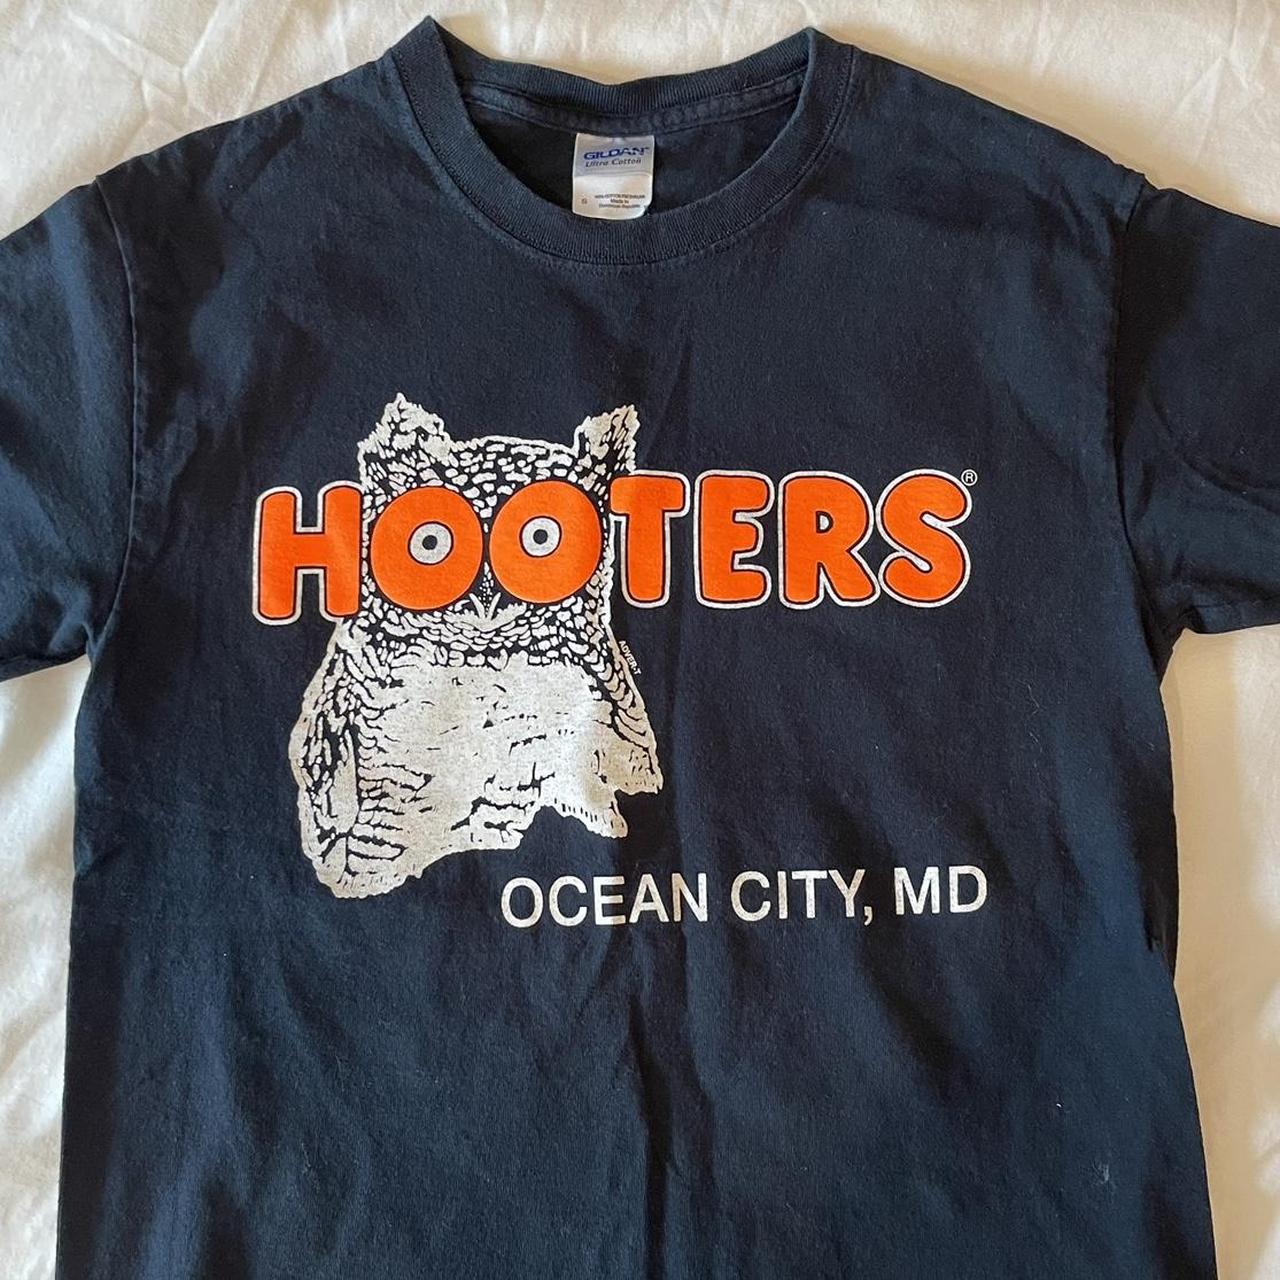 Vintage early 2000s hooters graphic tee with no... - Depop